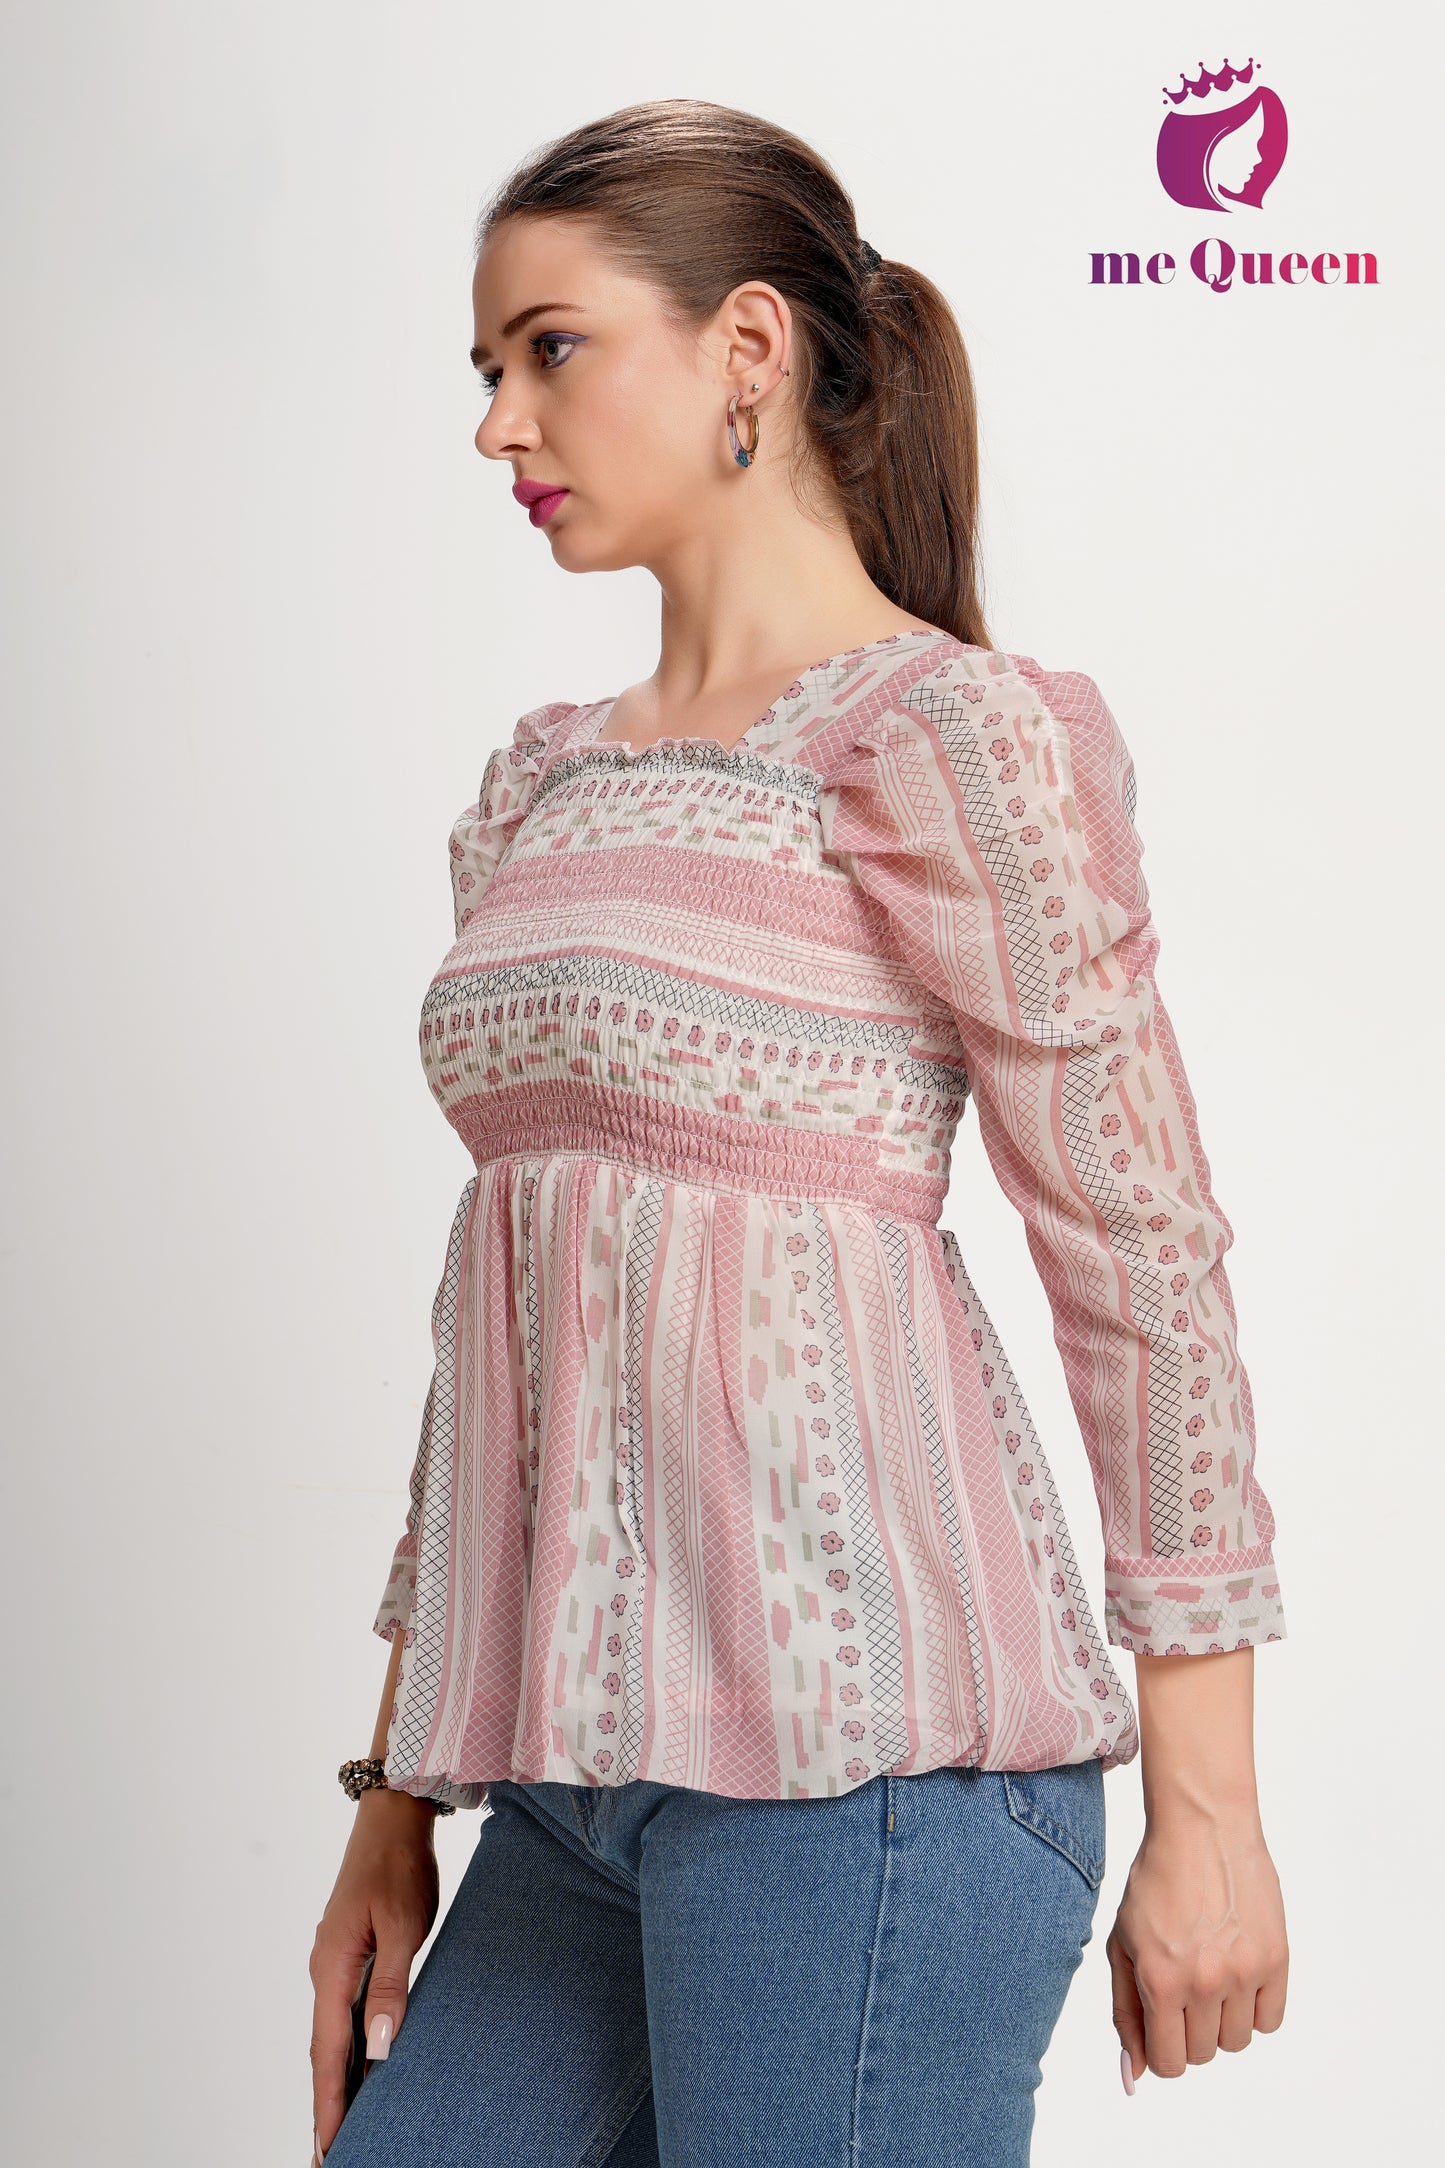 MeQueen's White & Pink Printed Peplum Top